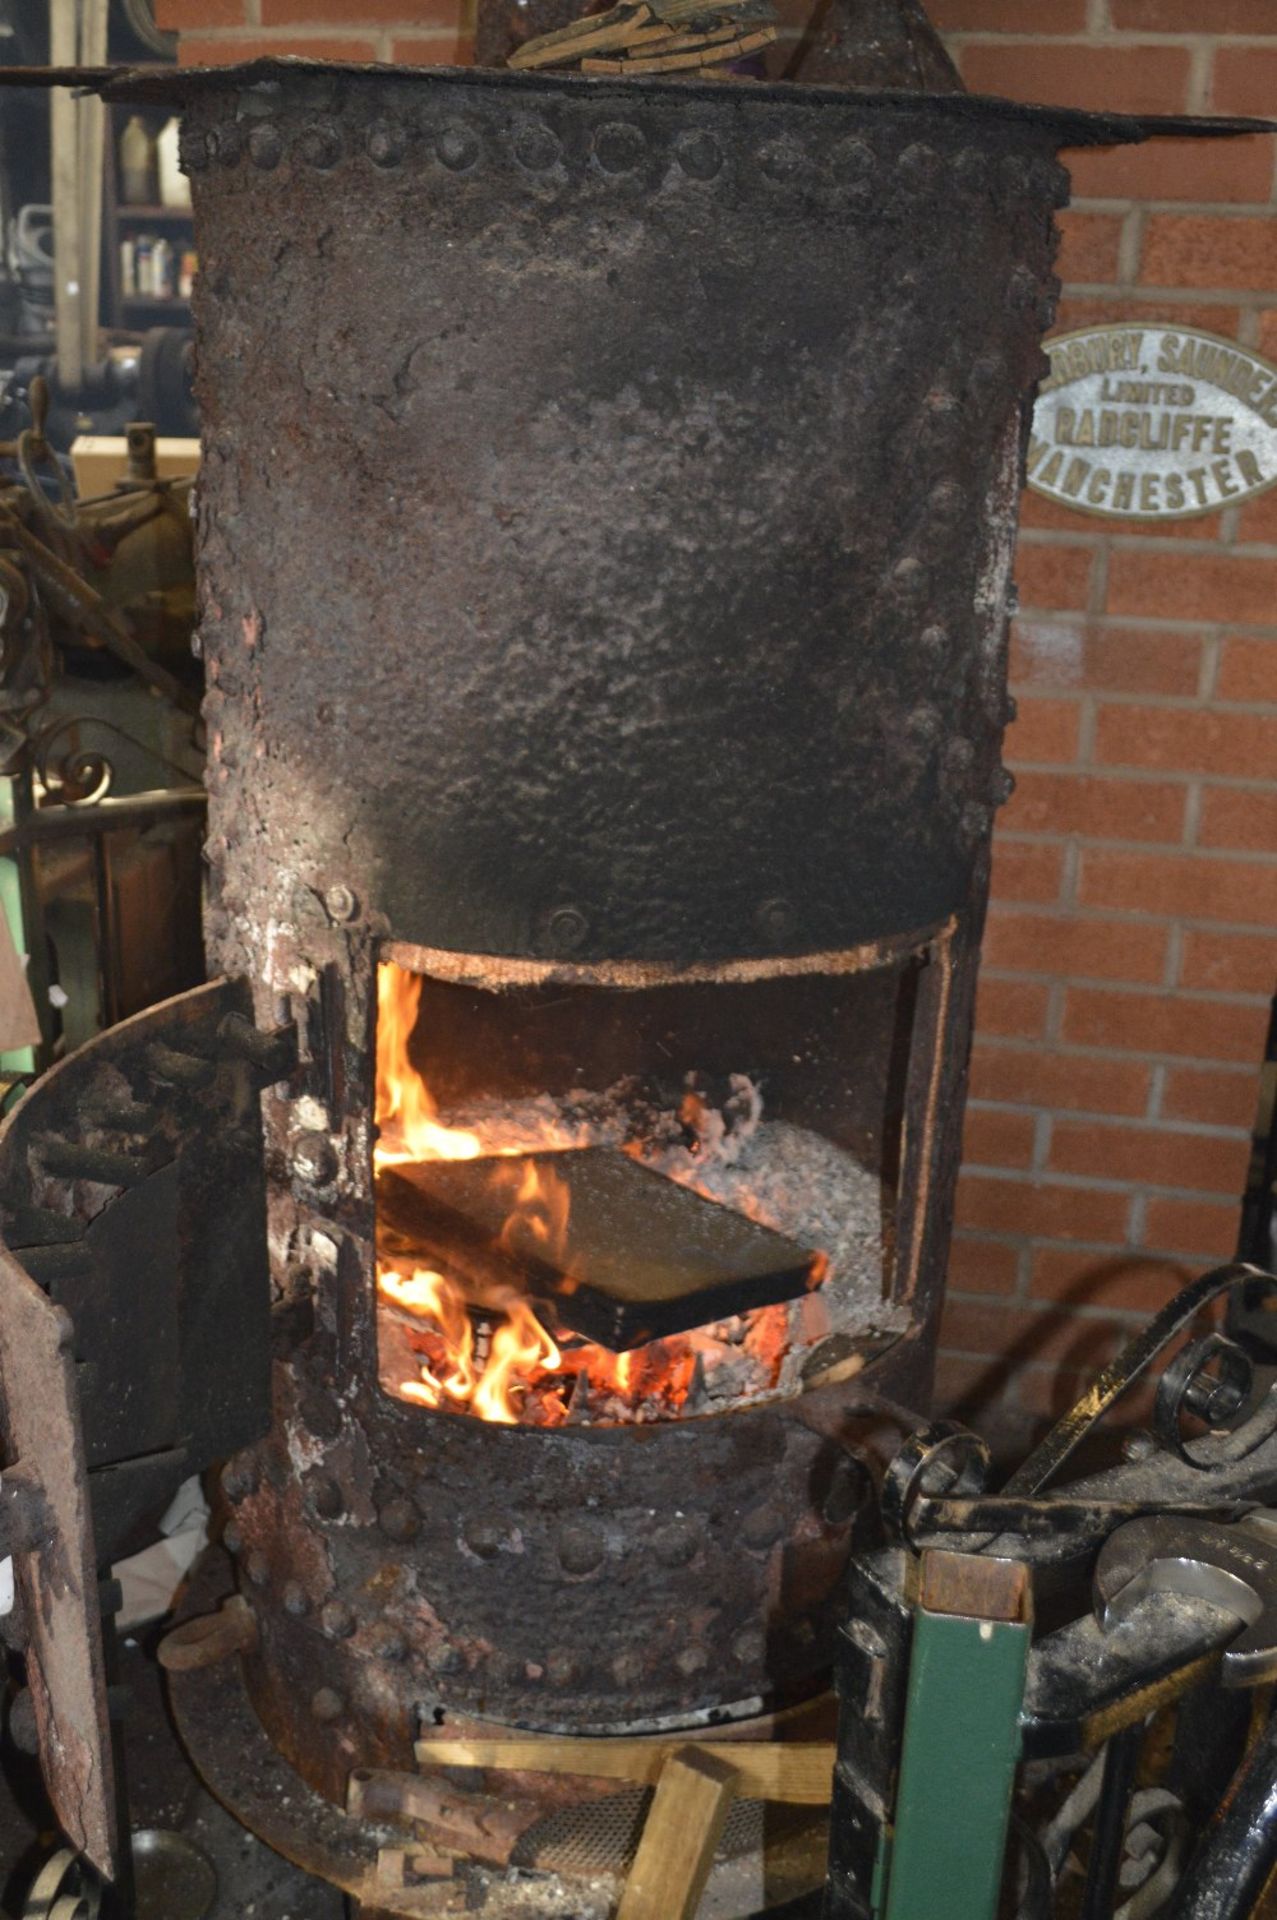 The original boiler from Betsy the steam engine, converted to a wood burner, diameter approx. 30". - Image 2 of 5